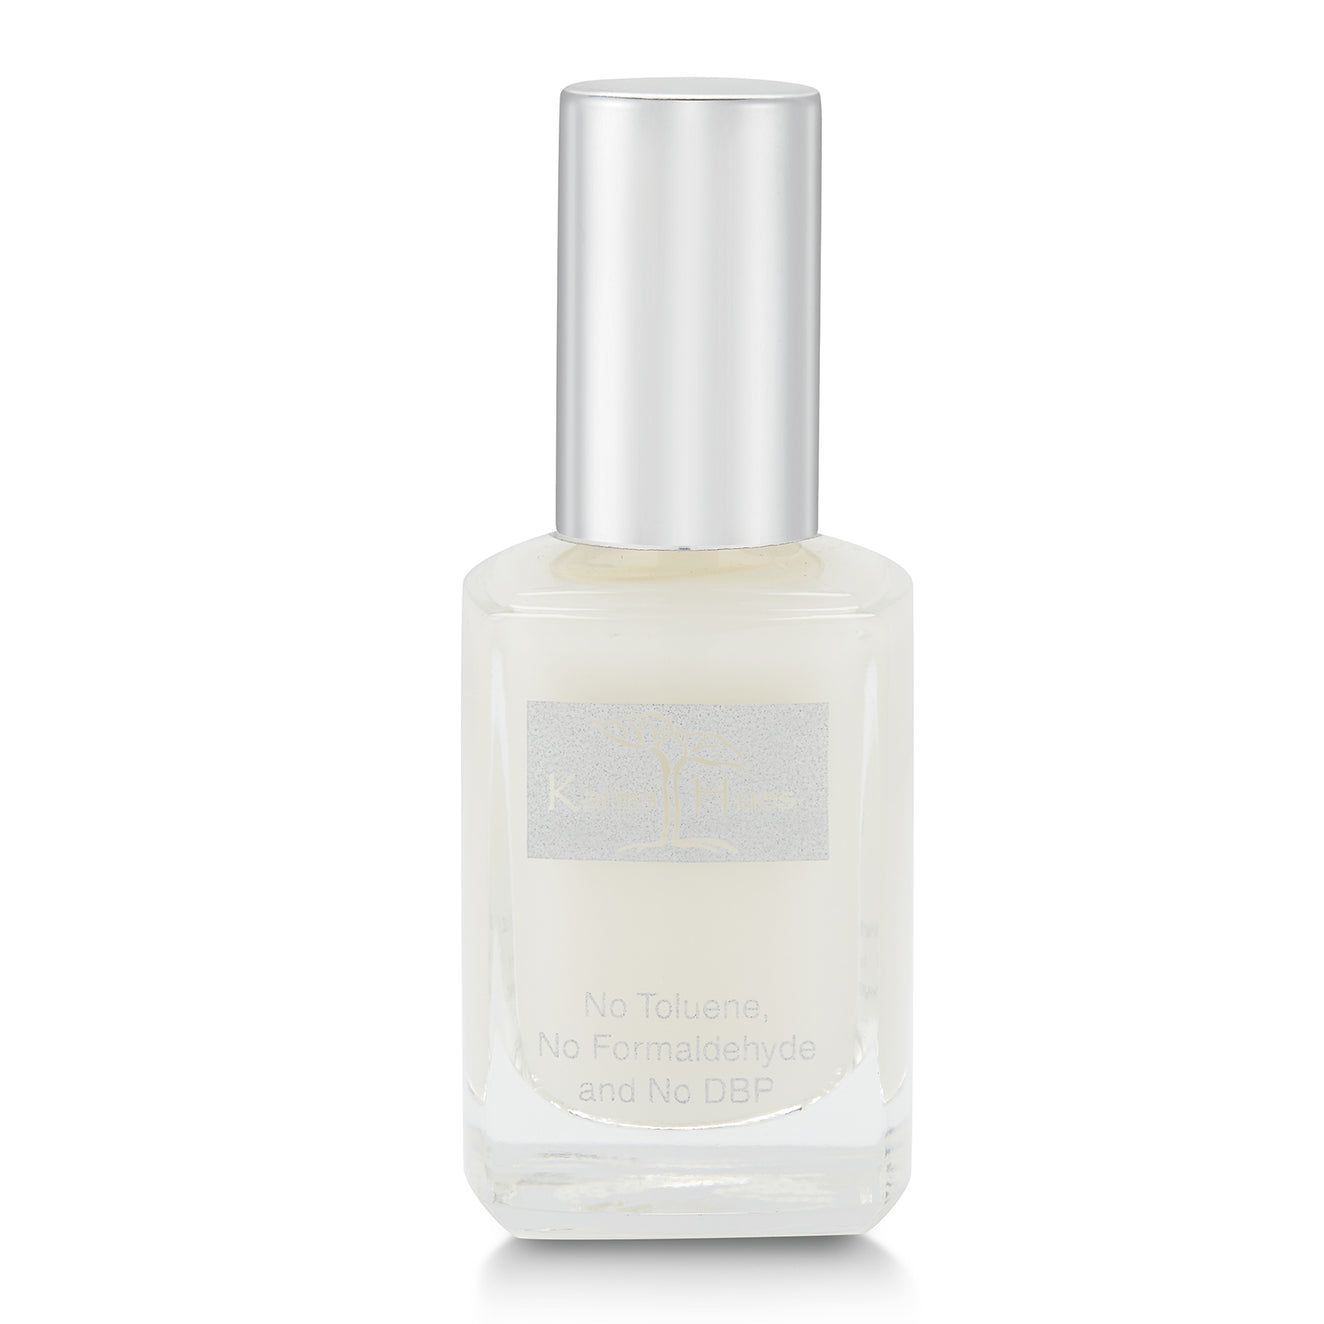 7 In 1 Elixir - Nail Treatment; Non-Toxic, Vegan, and Cruelty-Free (#19628)